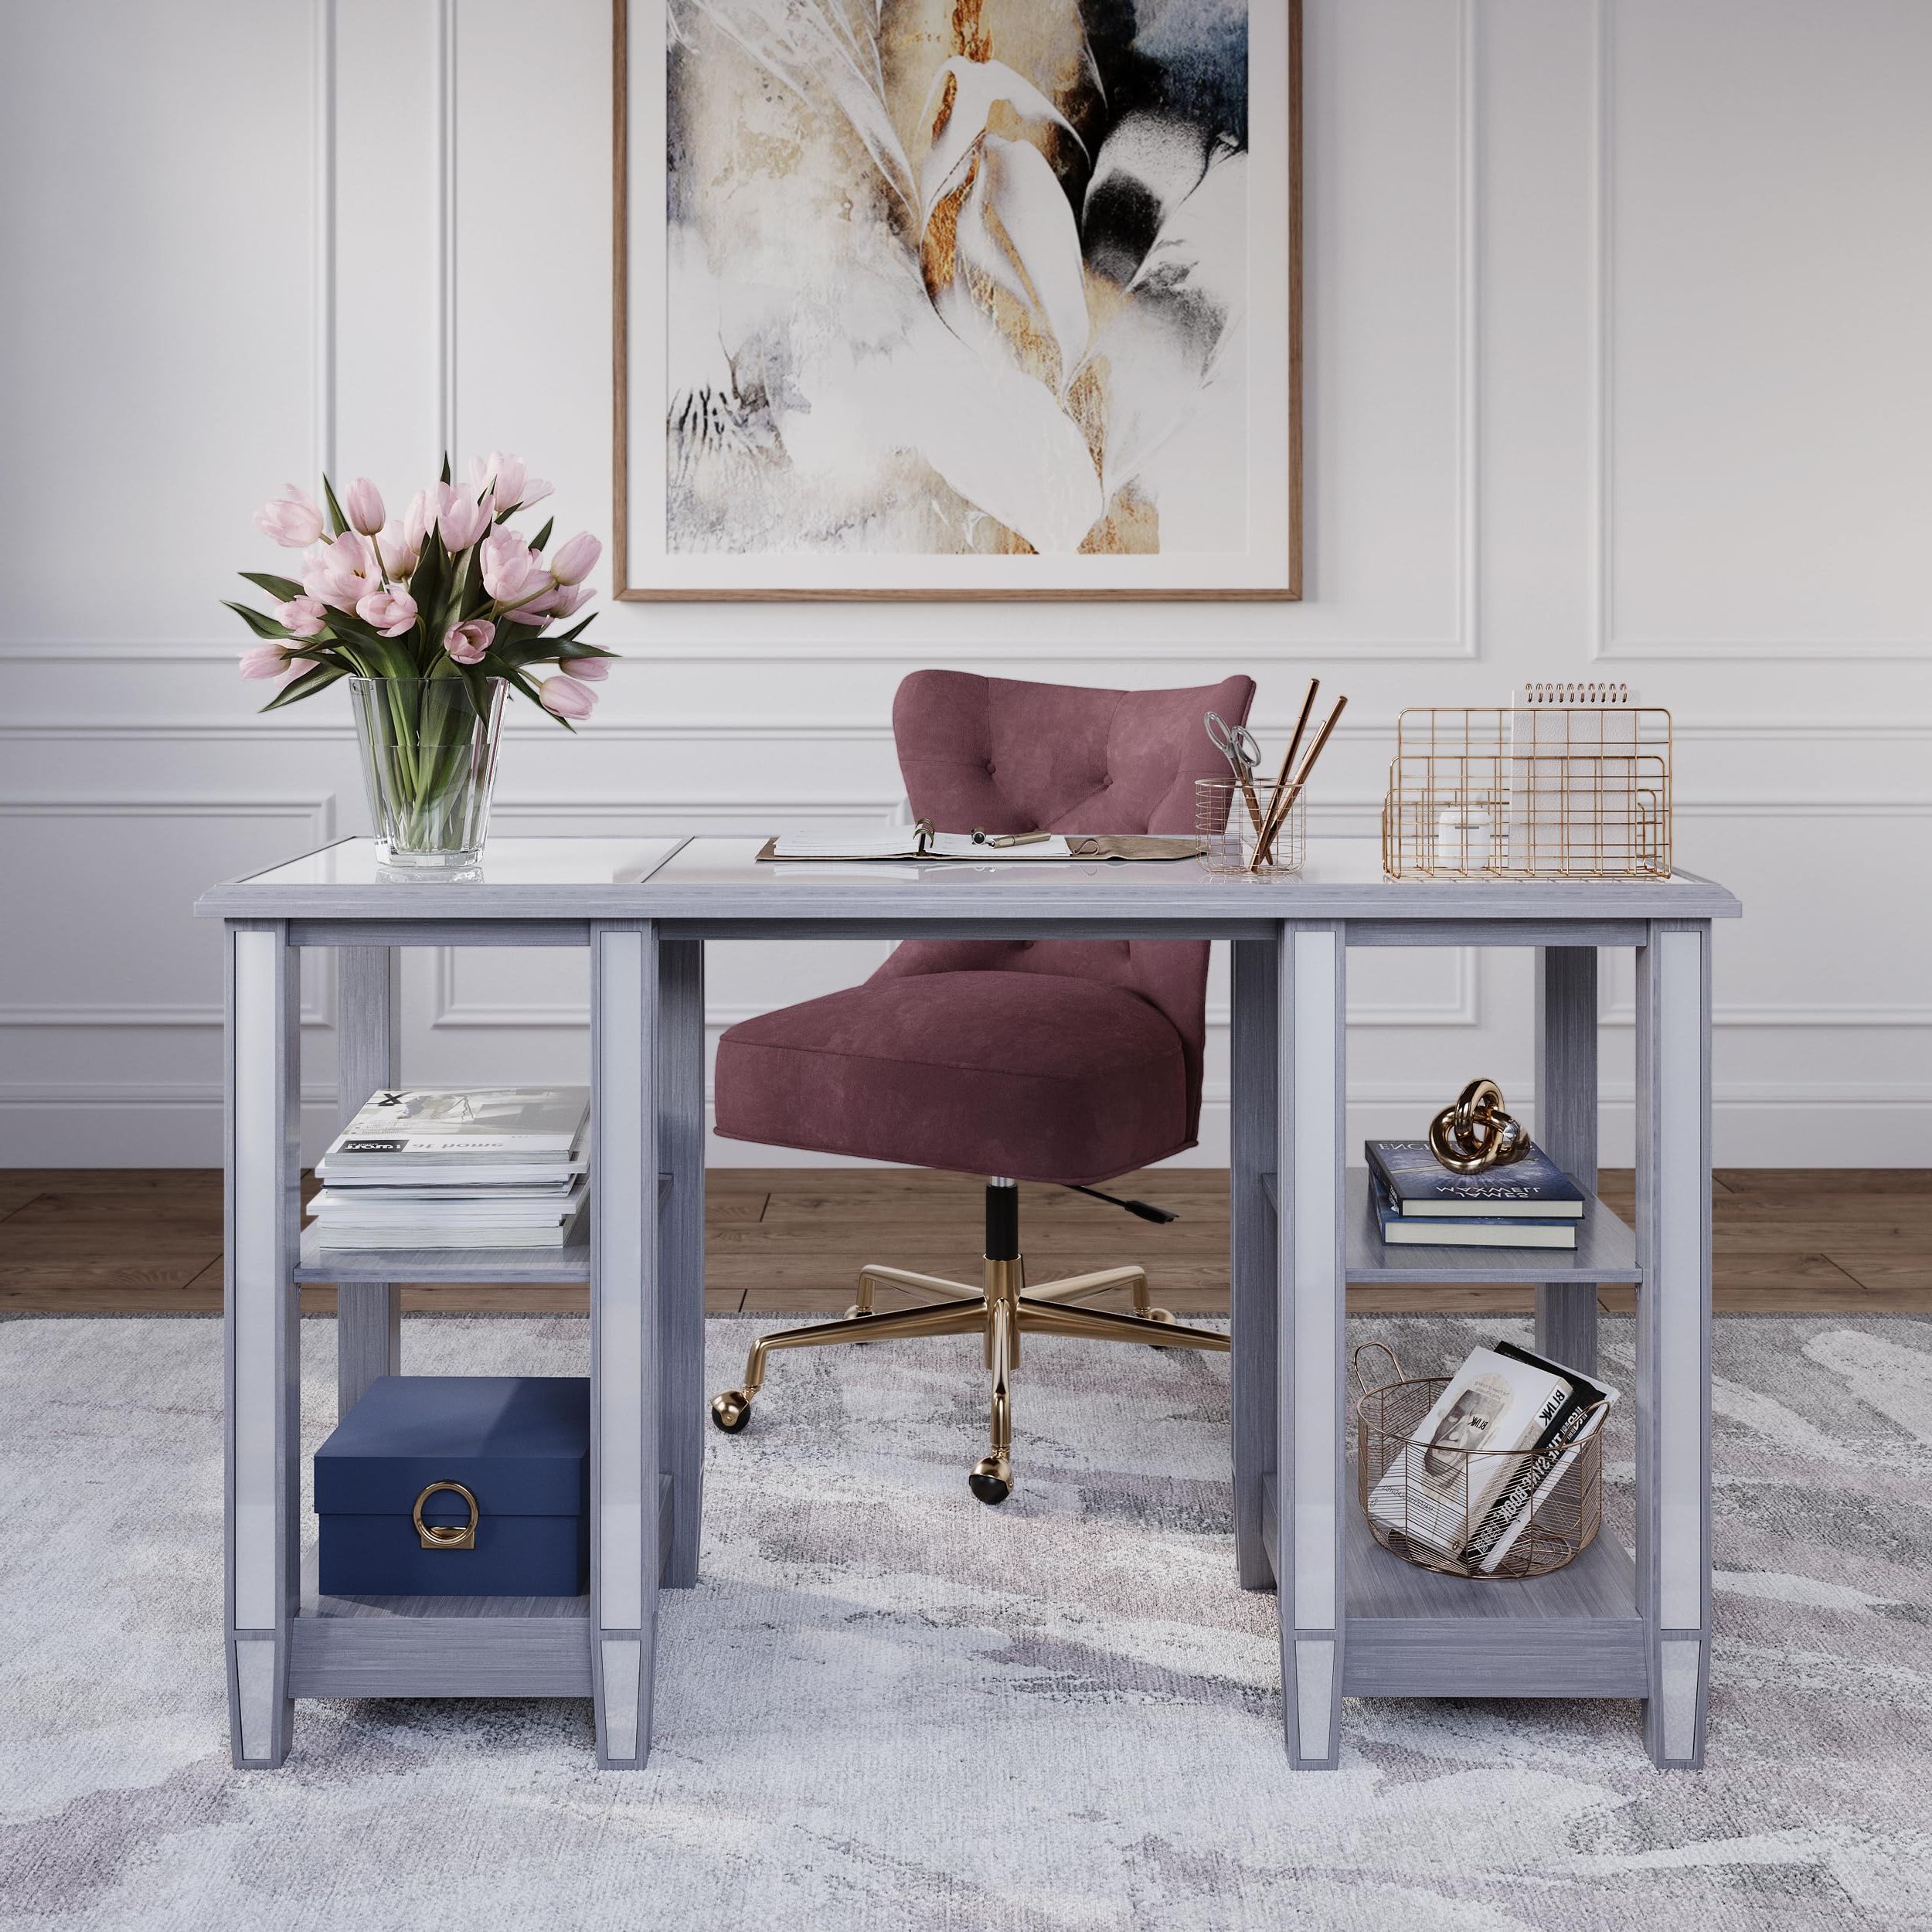 Southern Enterprises Larksmill Coffee Tables Throughout 2019 Amazon: Sei Furniture Wedlyn Mirrored Desk, Silver : Home & Kitchen (View 7 of 10)